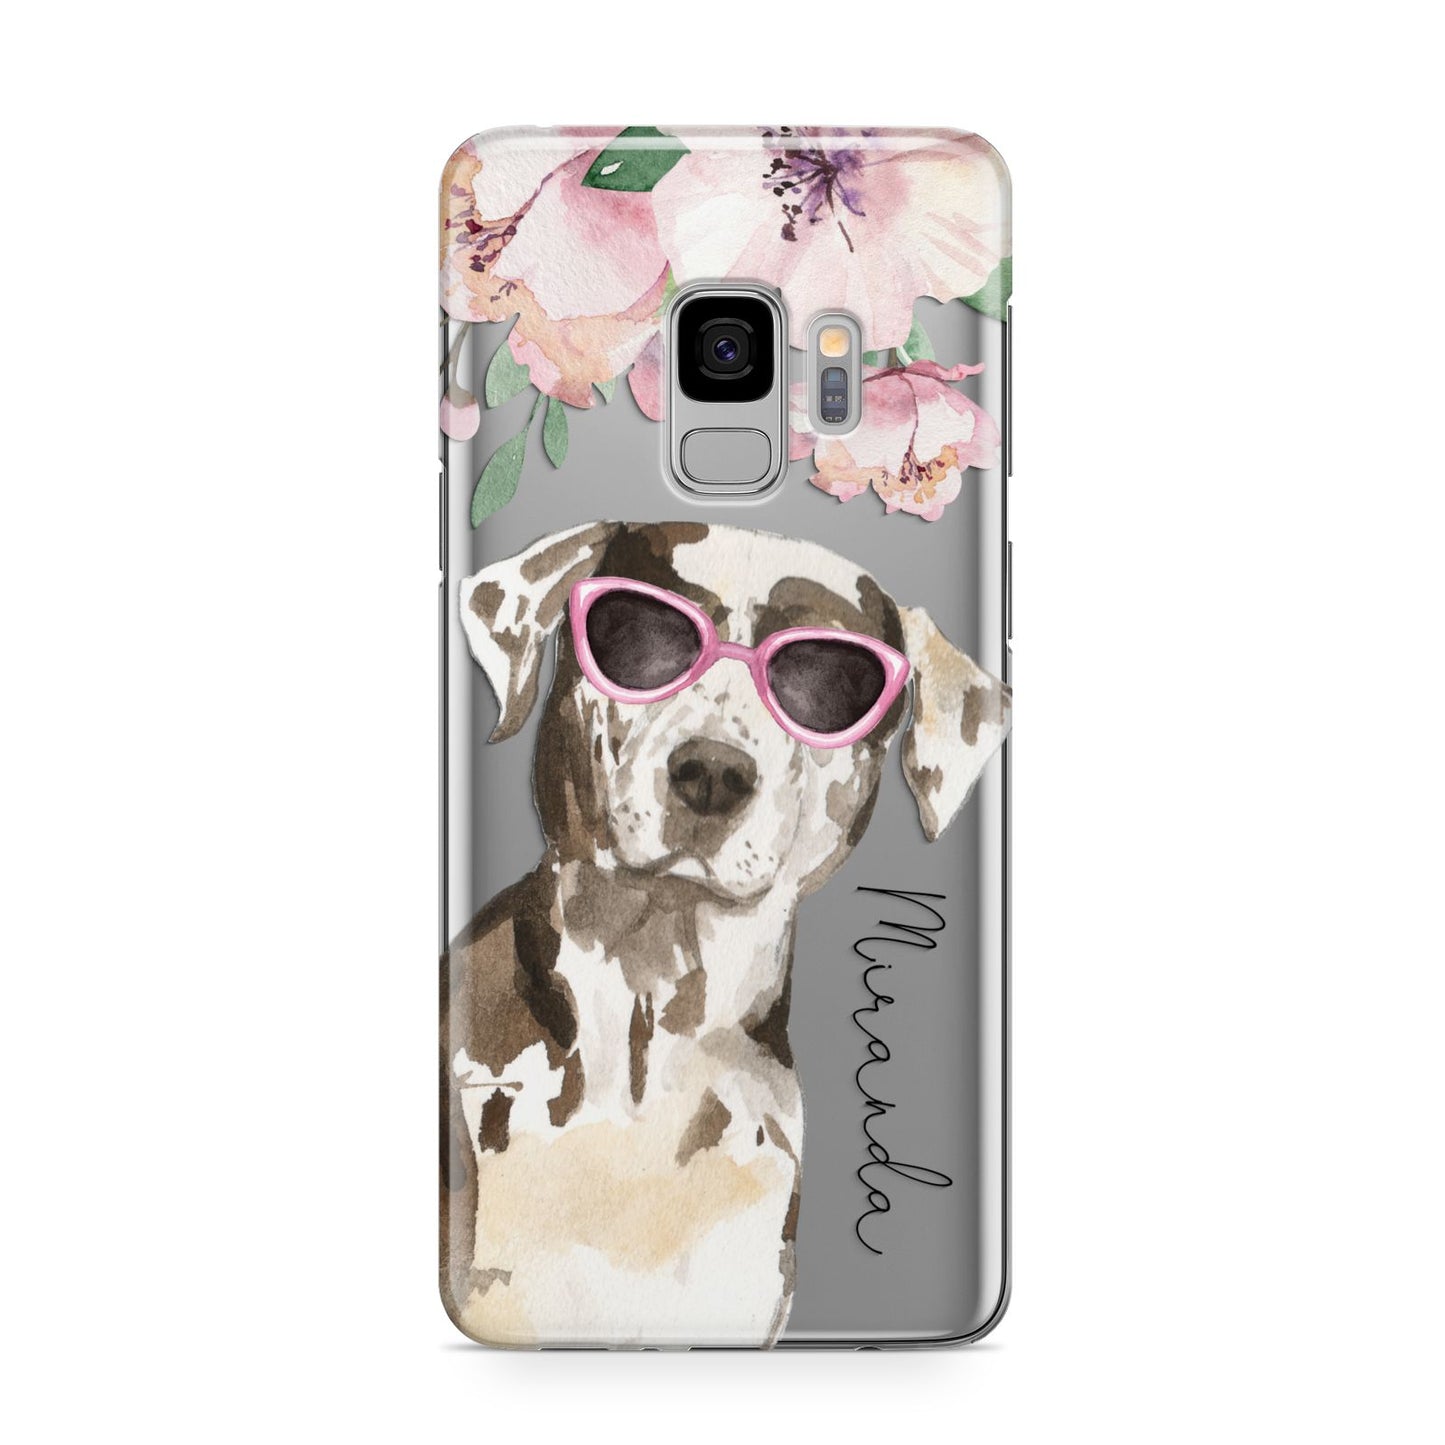 Personalised Catahoula Leopard Dog Samsung Galaxy S9 Case